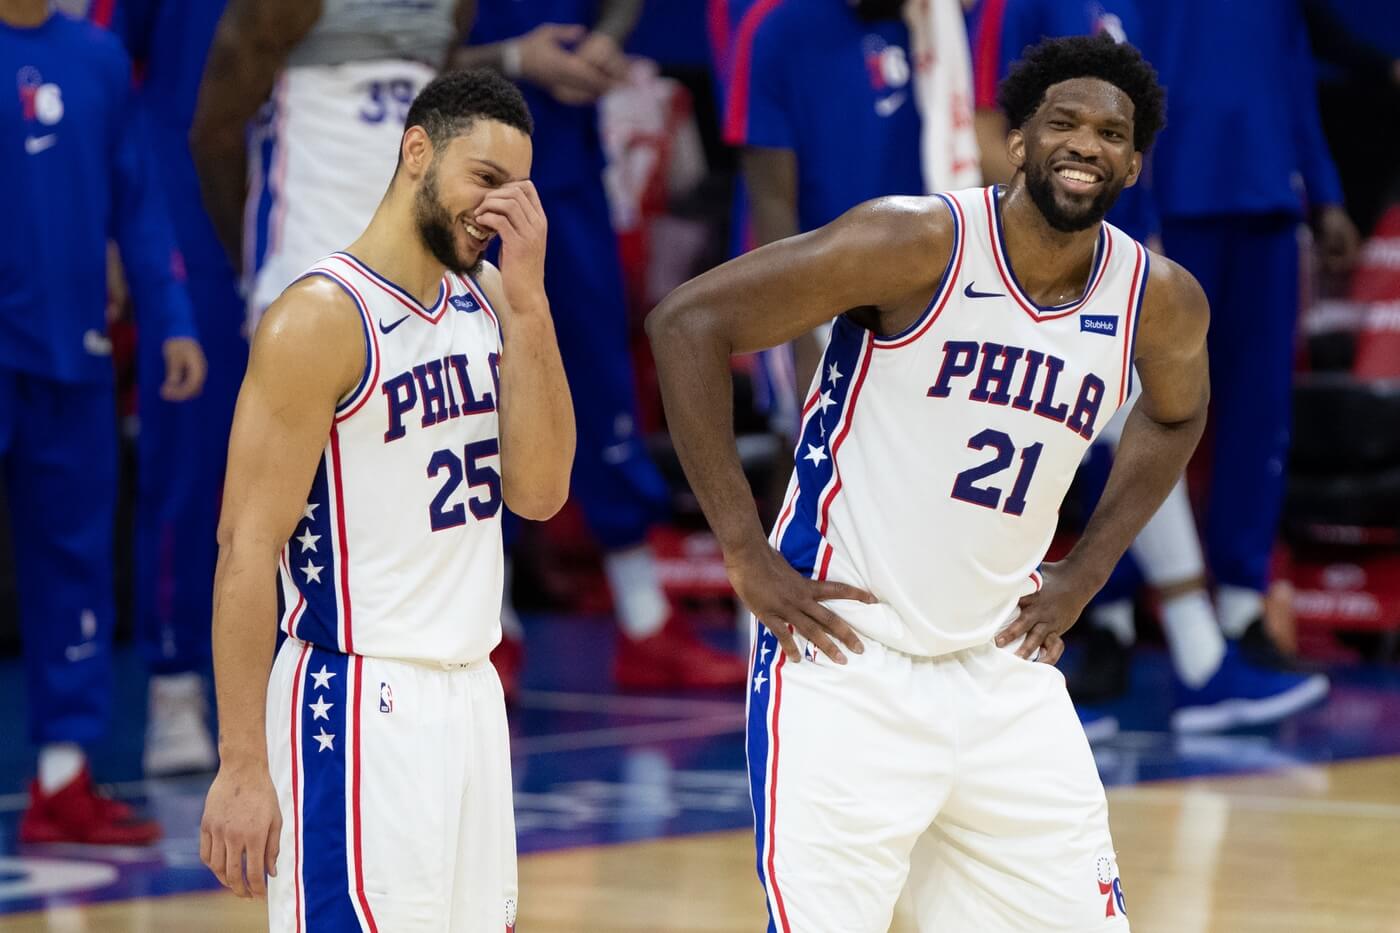 Jan 6, 2021; Philadelphia, Pennsylvania, USA; Philadelphia 76ers center Joel Embiid (21) and guard Ben Simmons (25) react in the closing seconds of the fourth quarter against the Washington Wizards at Wells Fargo Center. Mandatory Credit: Bill Streicher-USA TODAY Sports